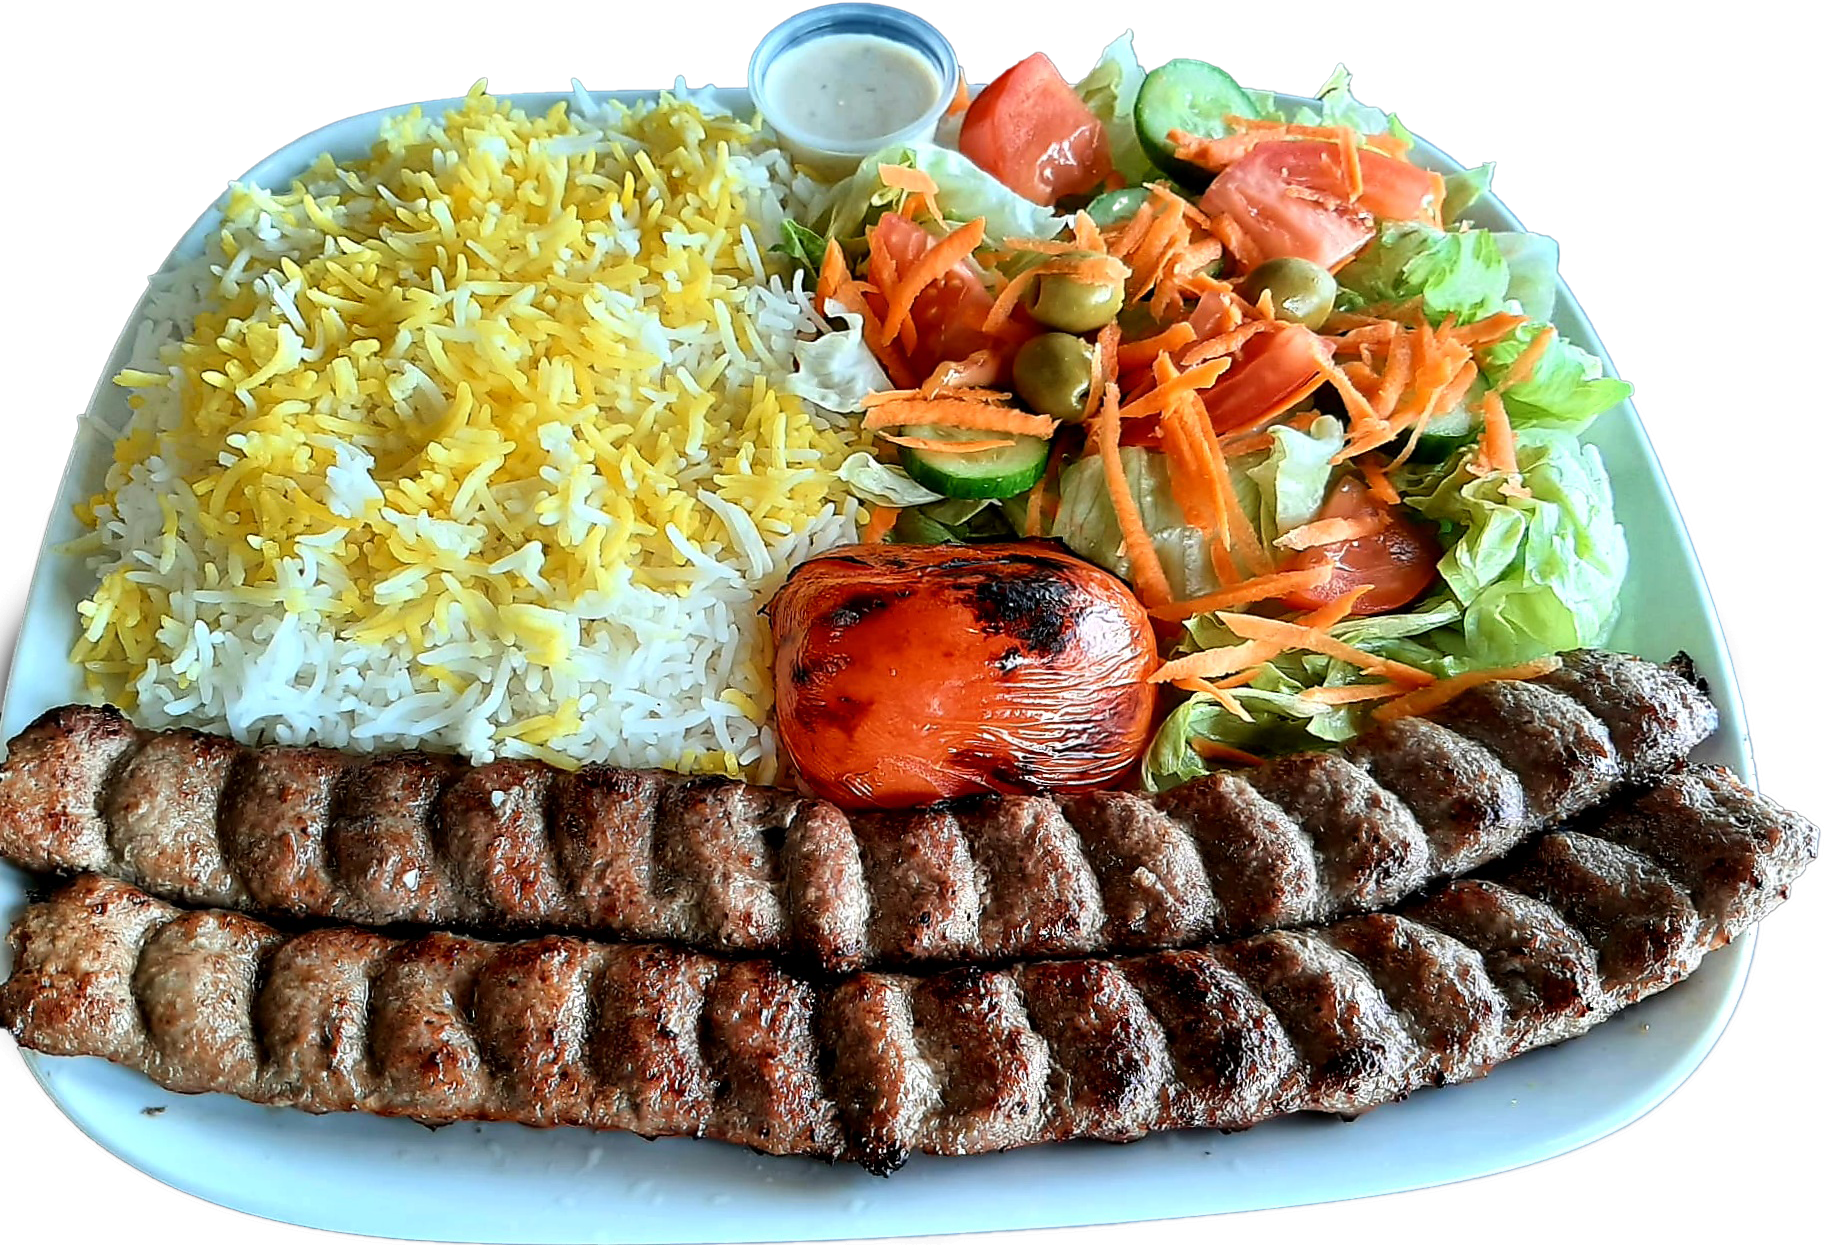 beef kebab with rice, salad, and grilled tomatoes